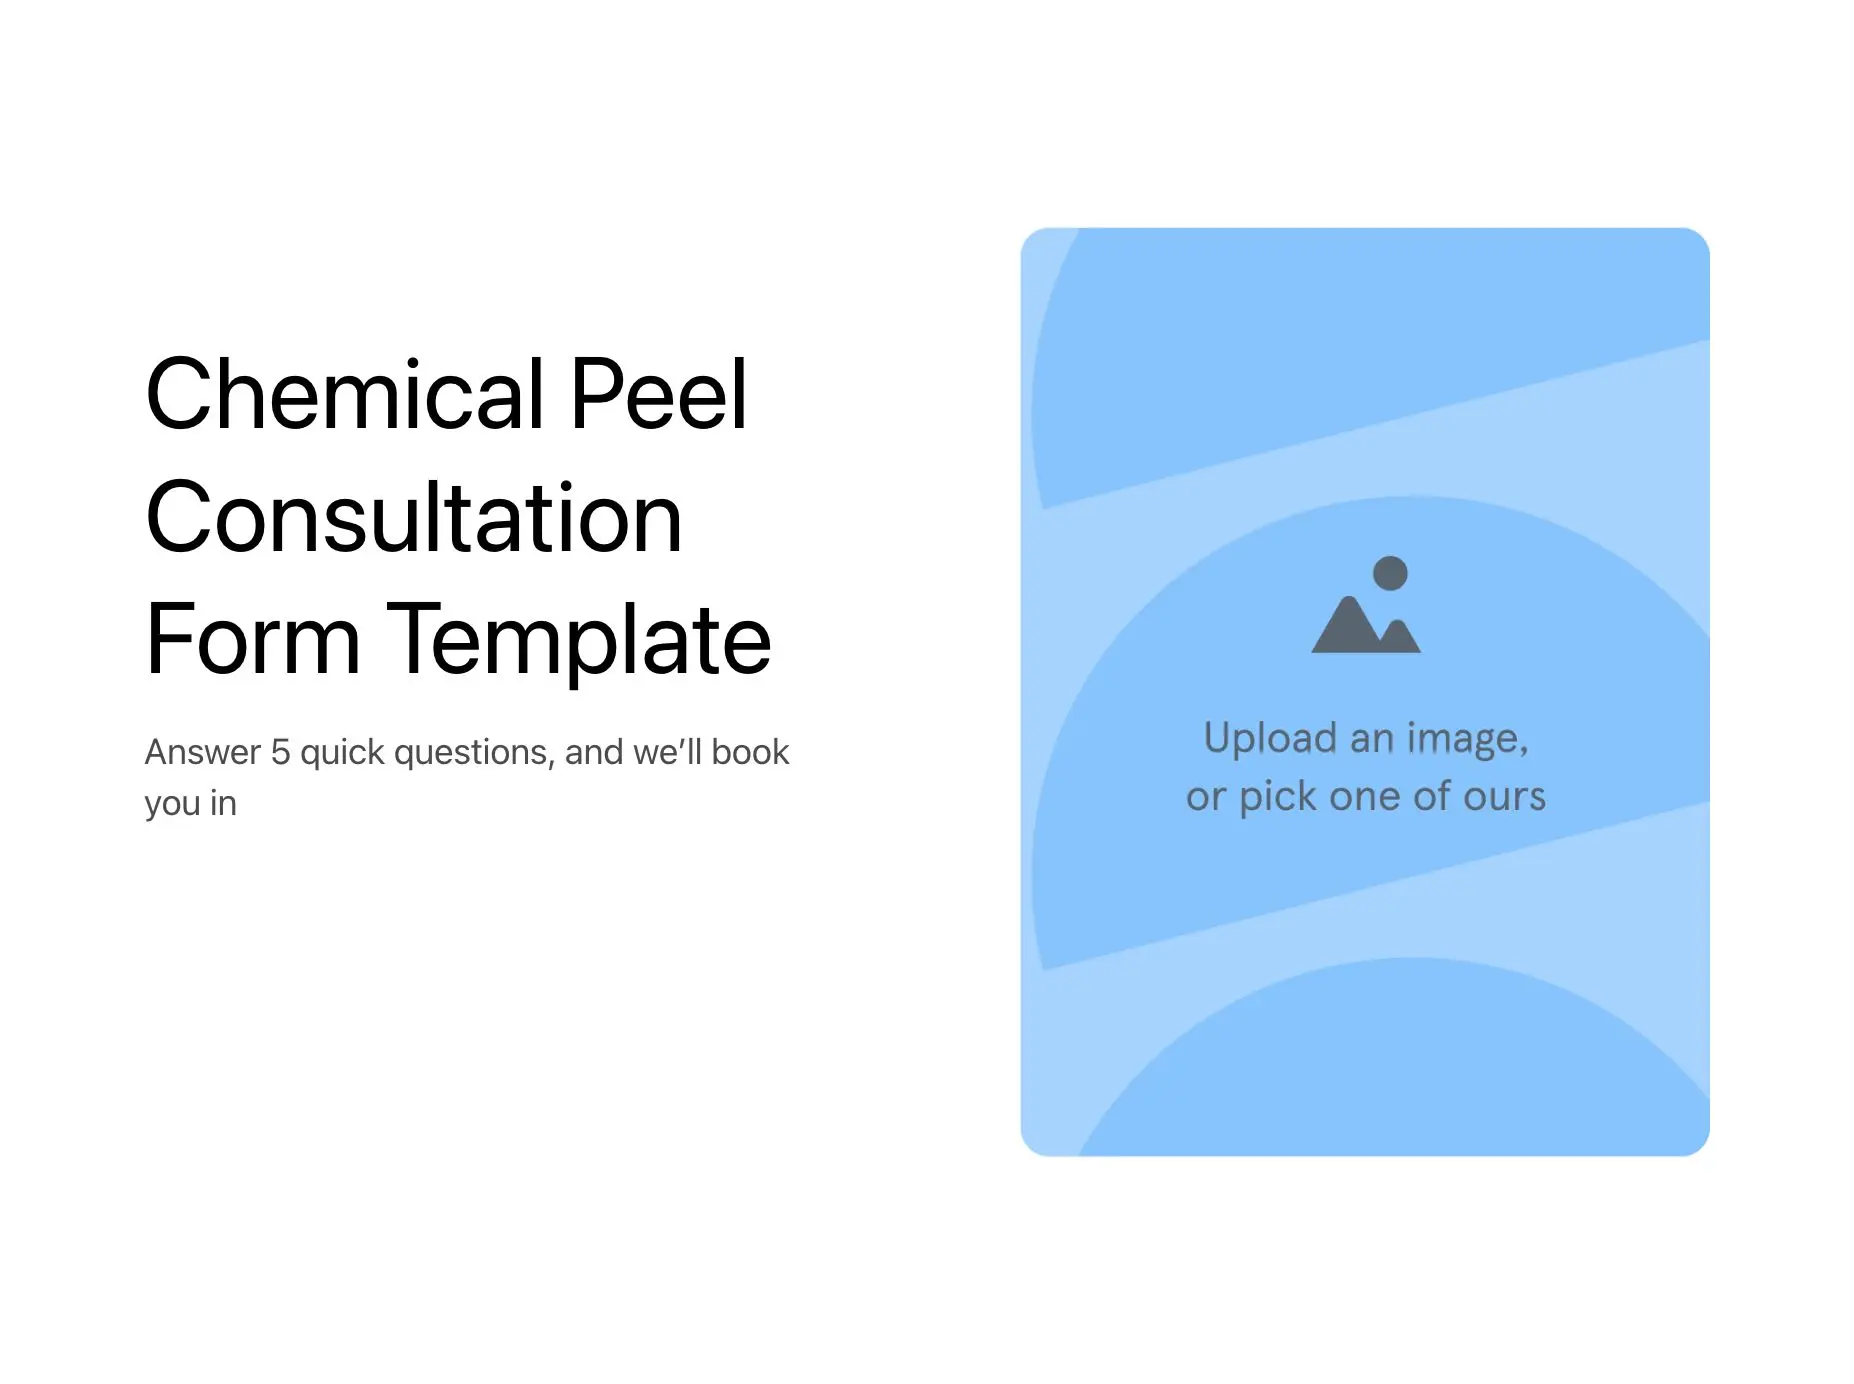 Chemical Peel Consultation Form Template Hero